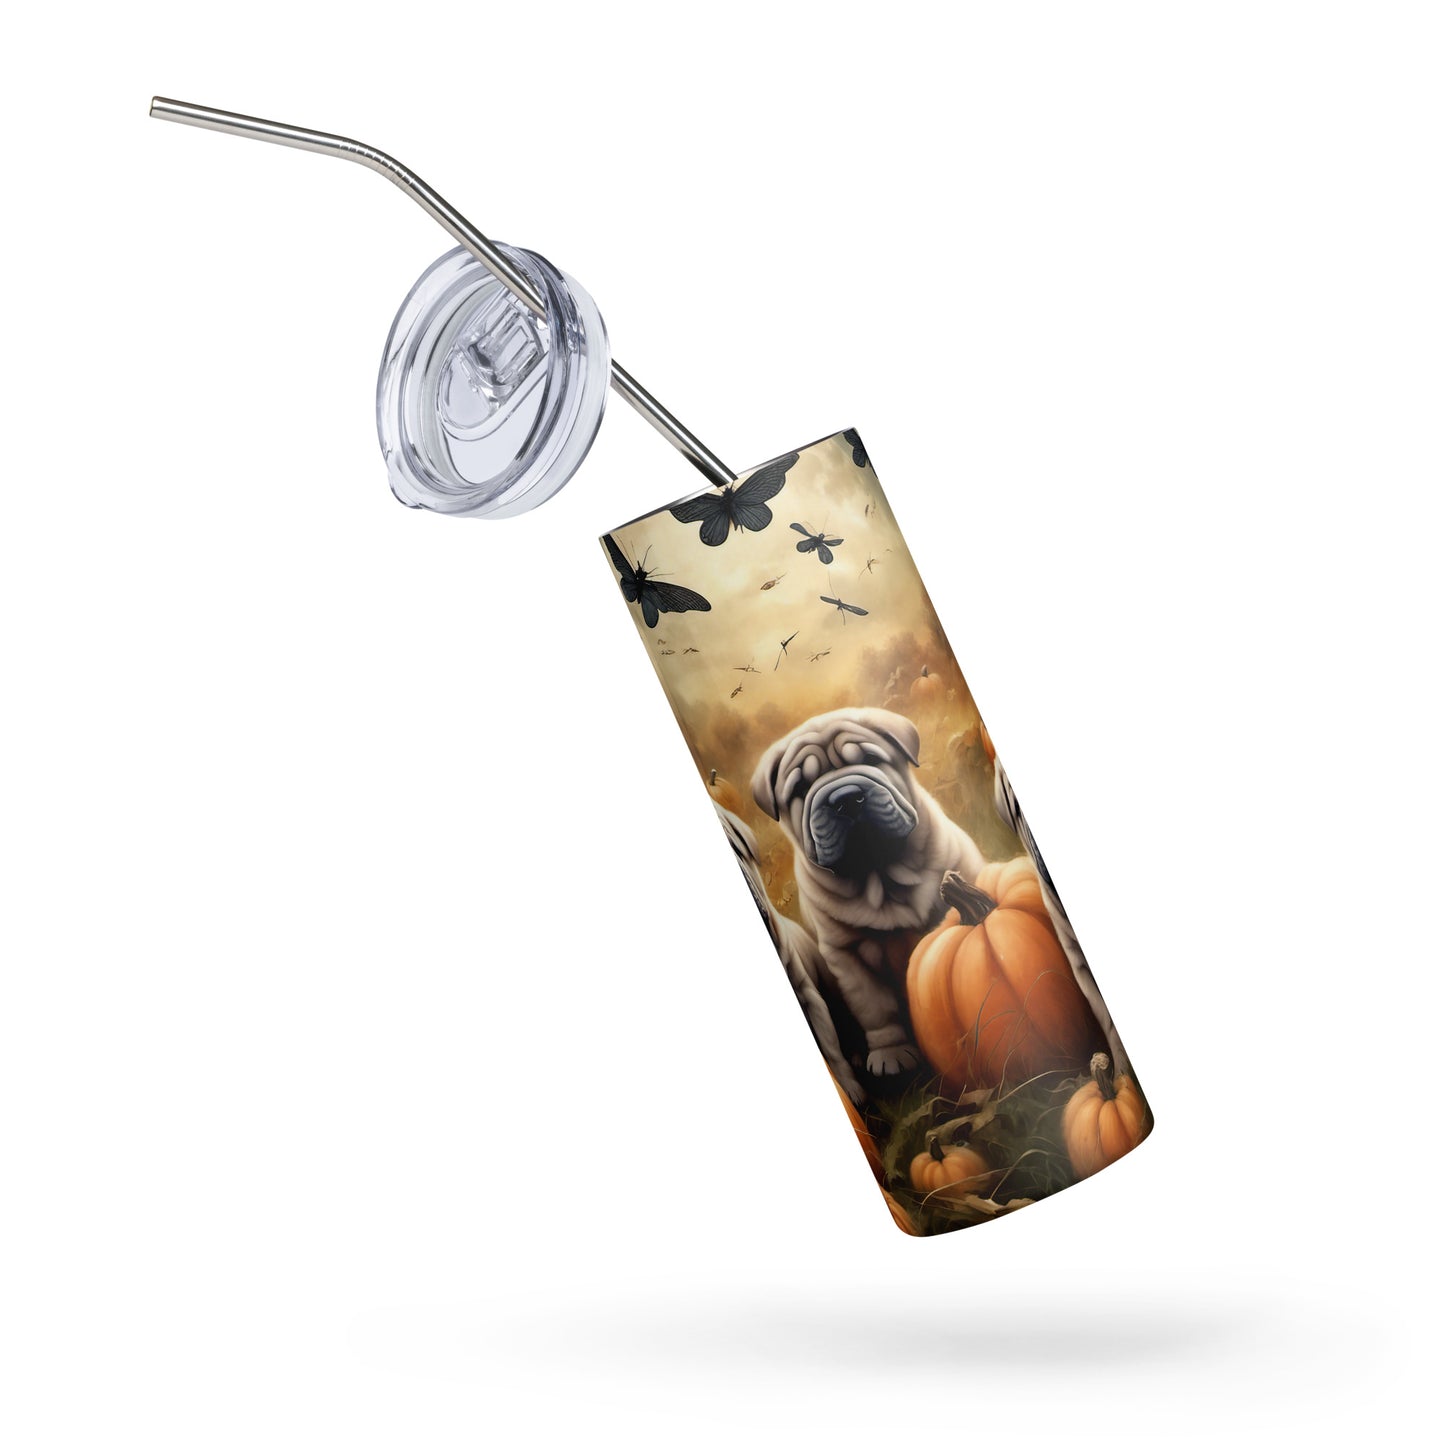 Shar Pei Puppies Playing in the Fall Pumpkin Patch Stainless steel tumbler CedarHill Country Market